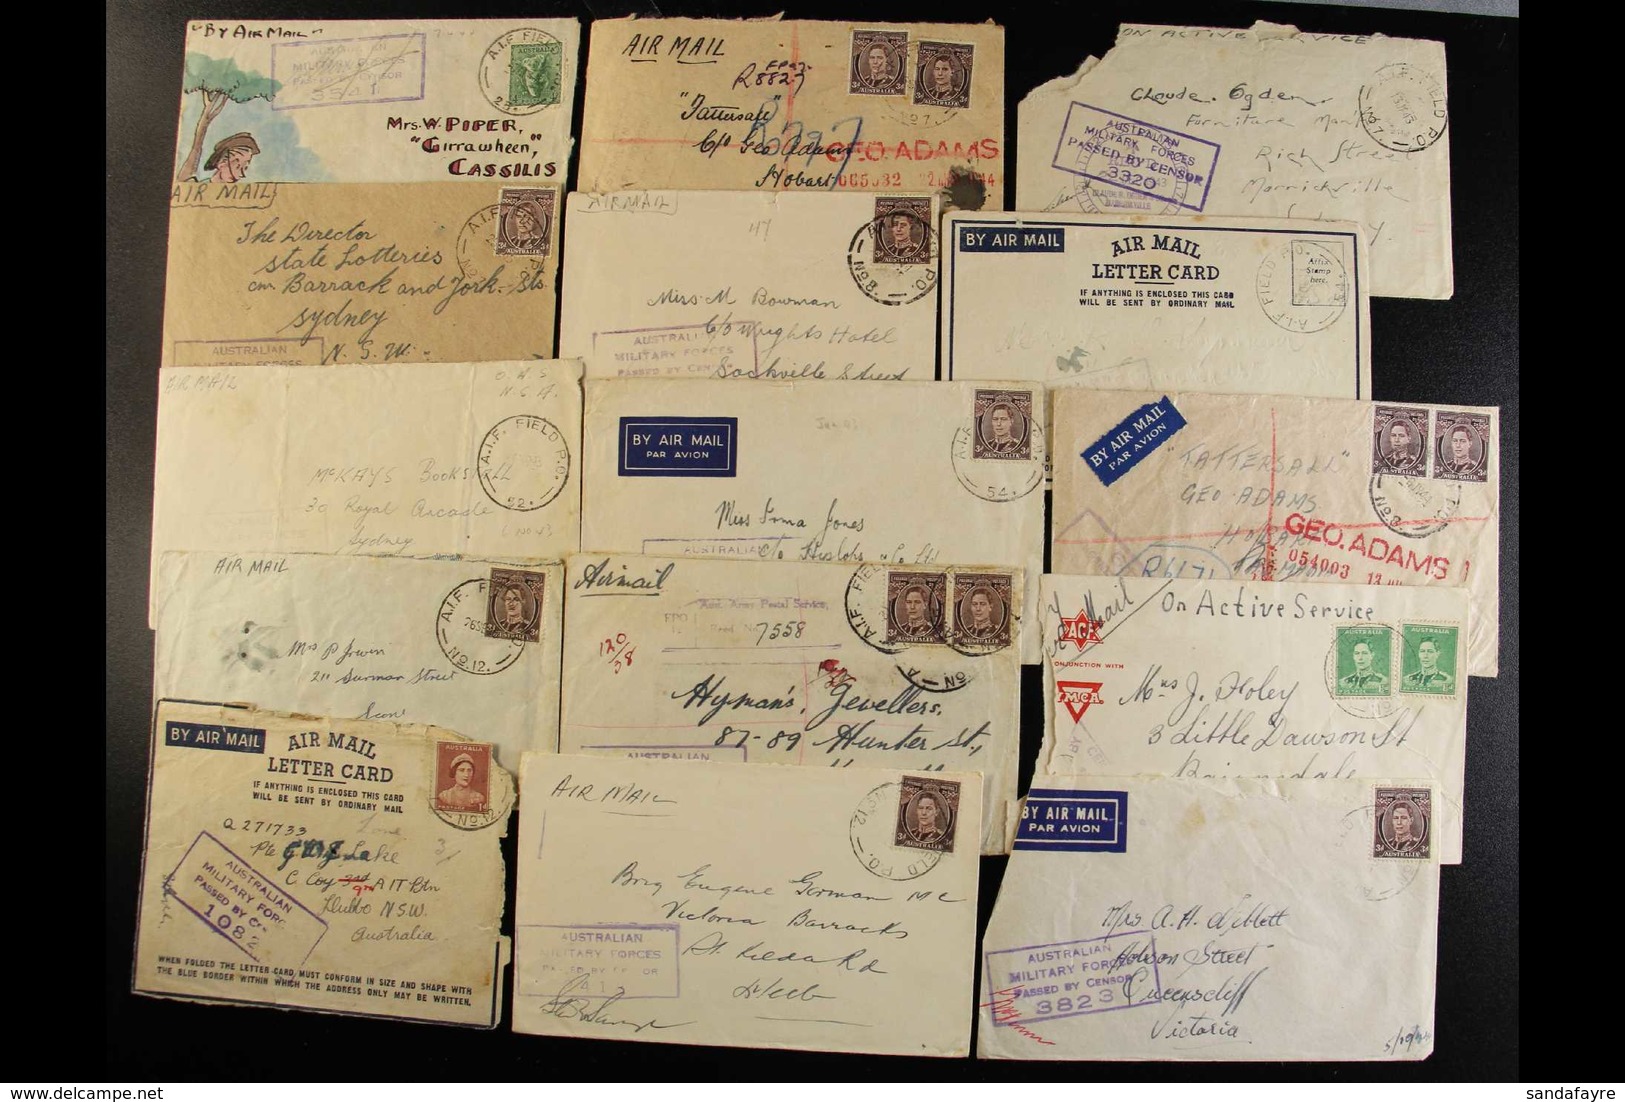 WW2 AUSTRALIAN FORCES - A.I.F. FIELD P.O. DATESTAMPS A Fine Collection Of Covers (couple Of Fronts) Back To Australia, B - Papouasie-Nouvelle-Guinée